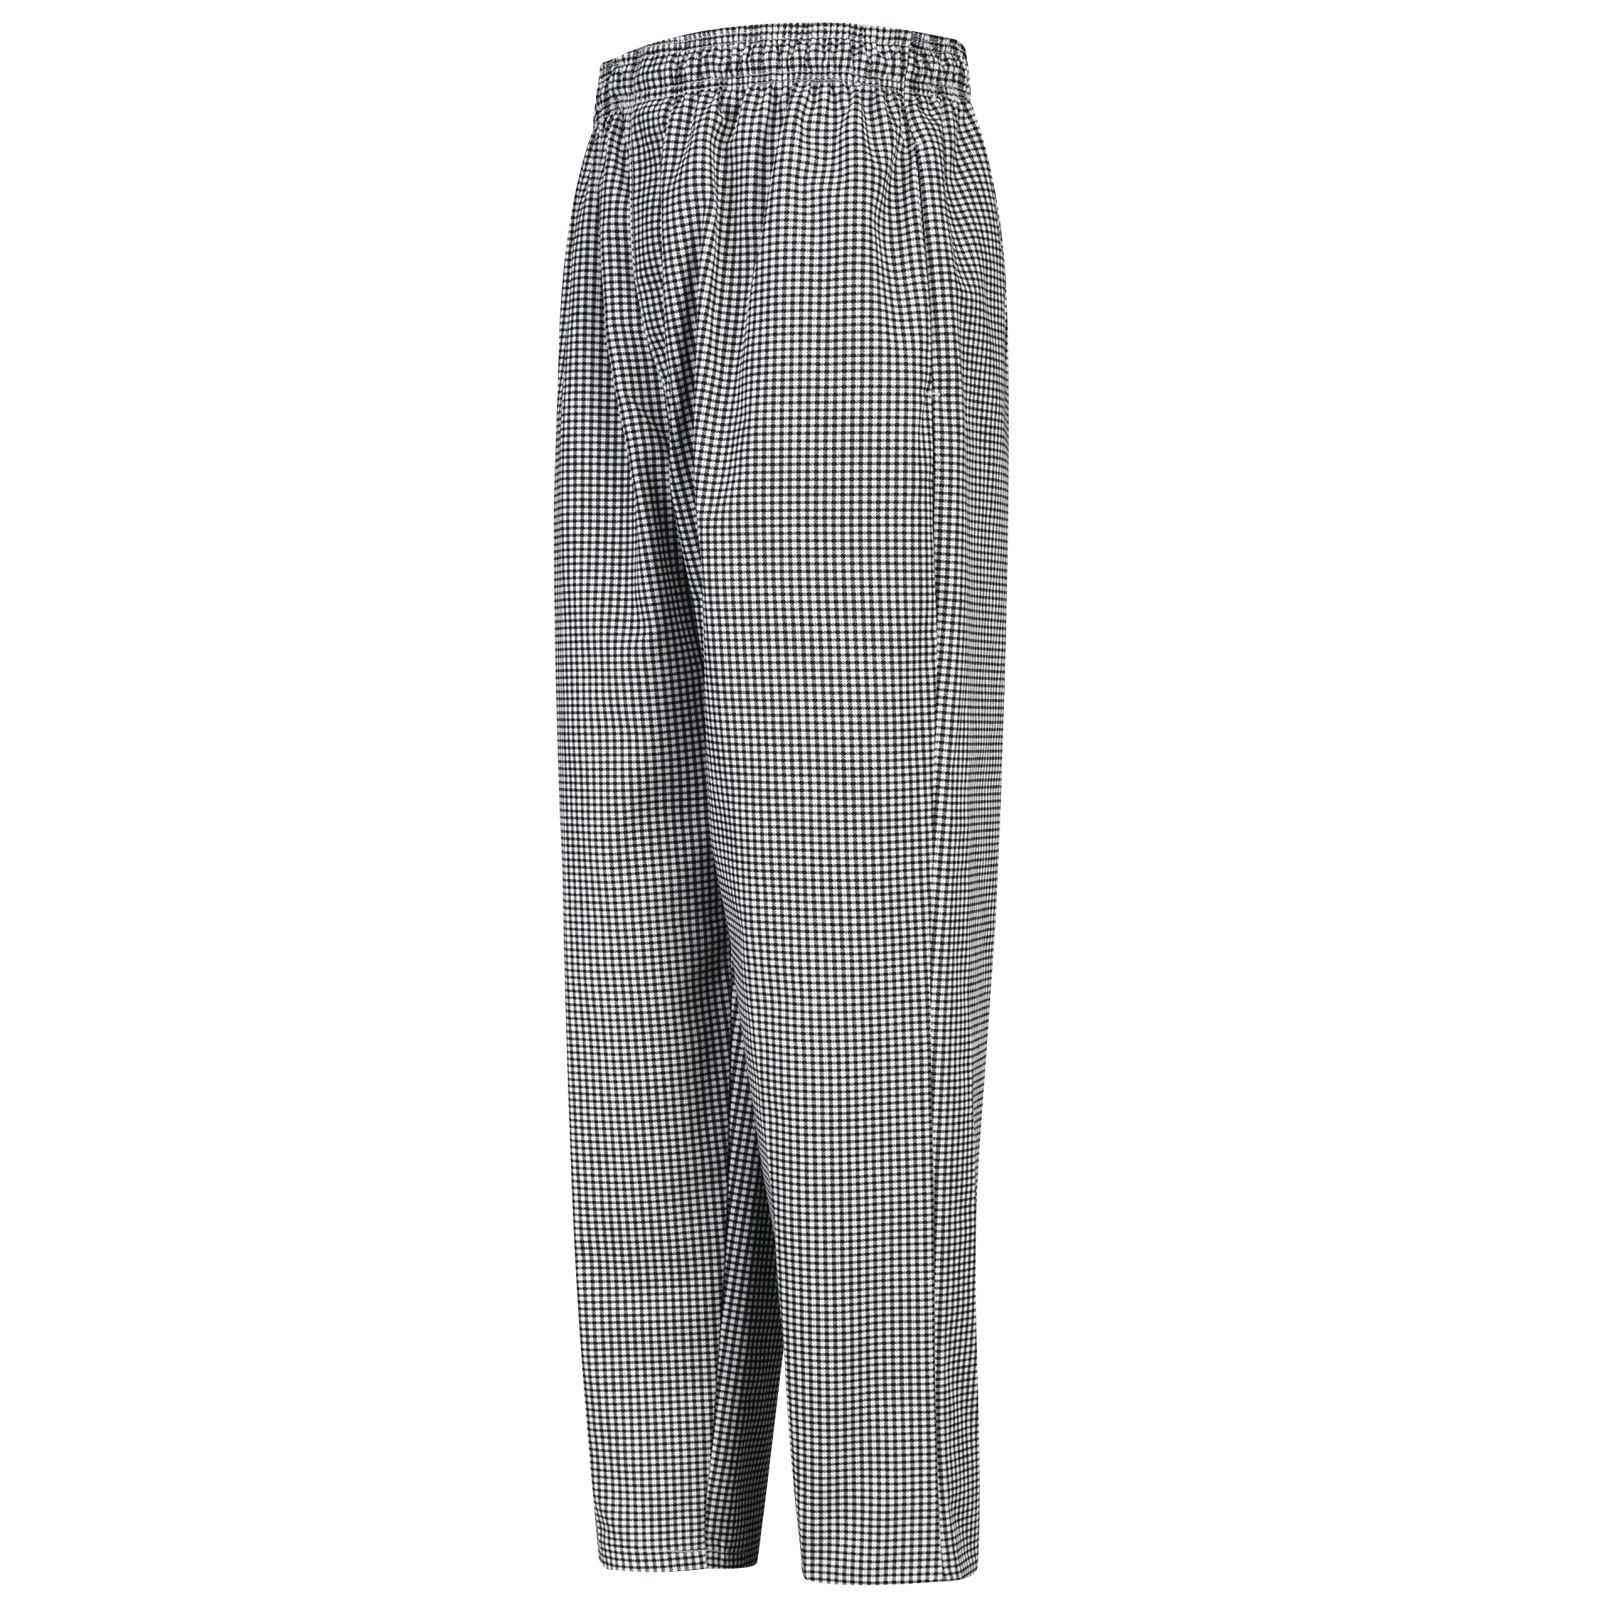 New Black White Checkered Traditional Chef Pants size 28,30,38,40,42,44,46,50 